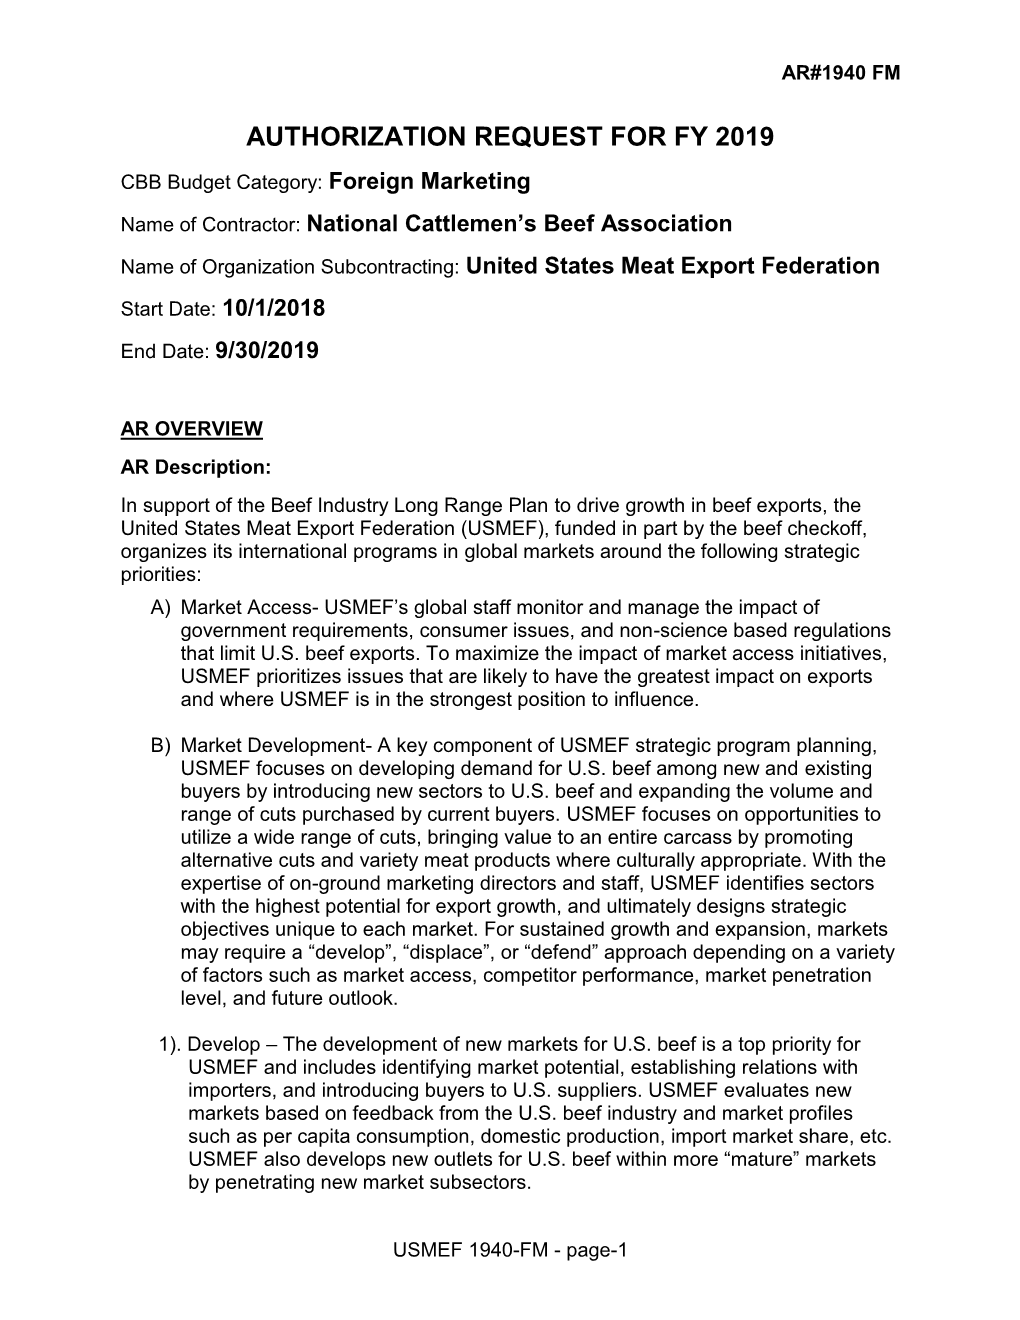 Authorization Request for Fy 2019